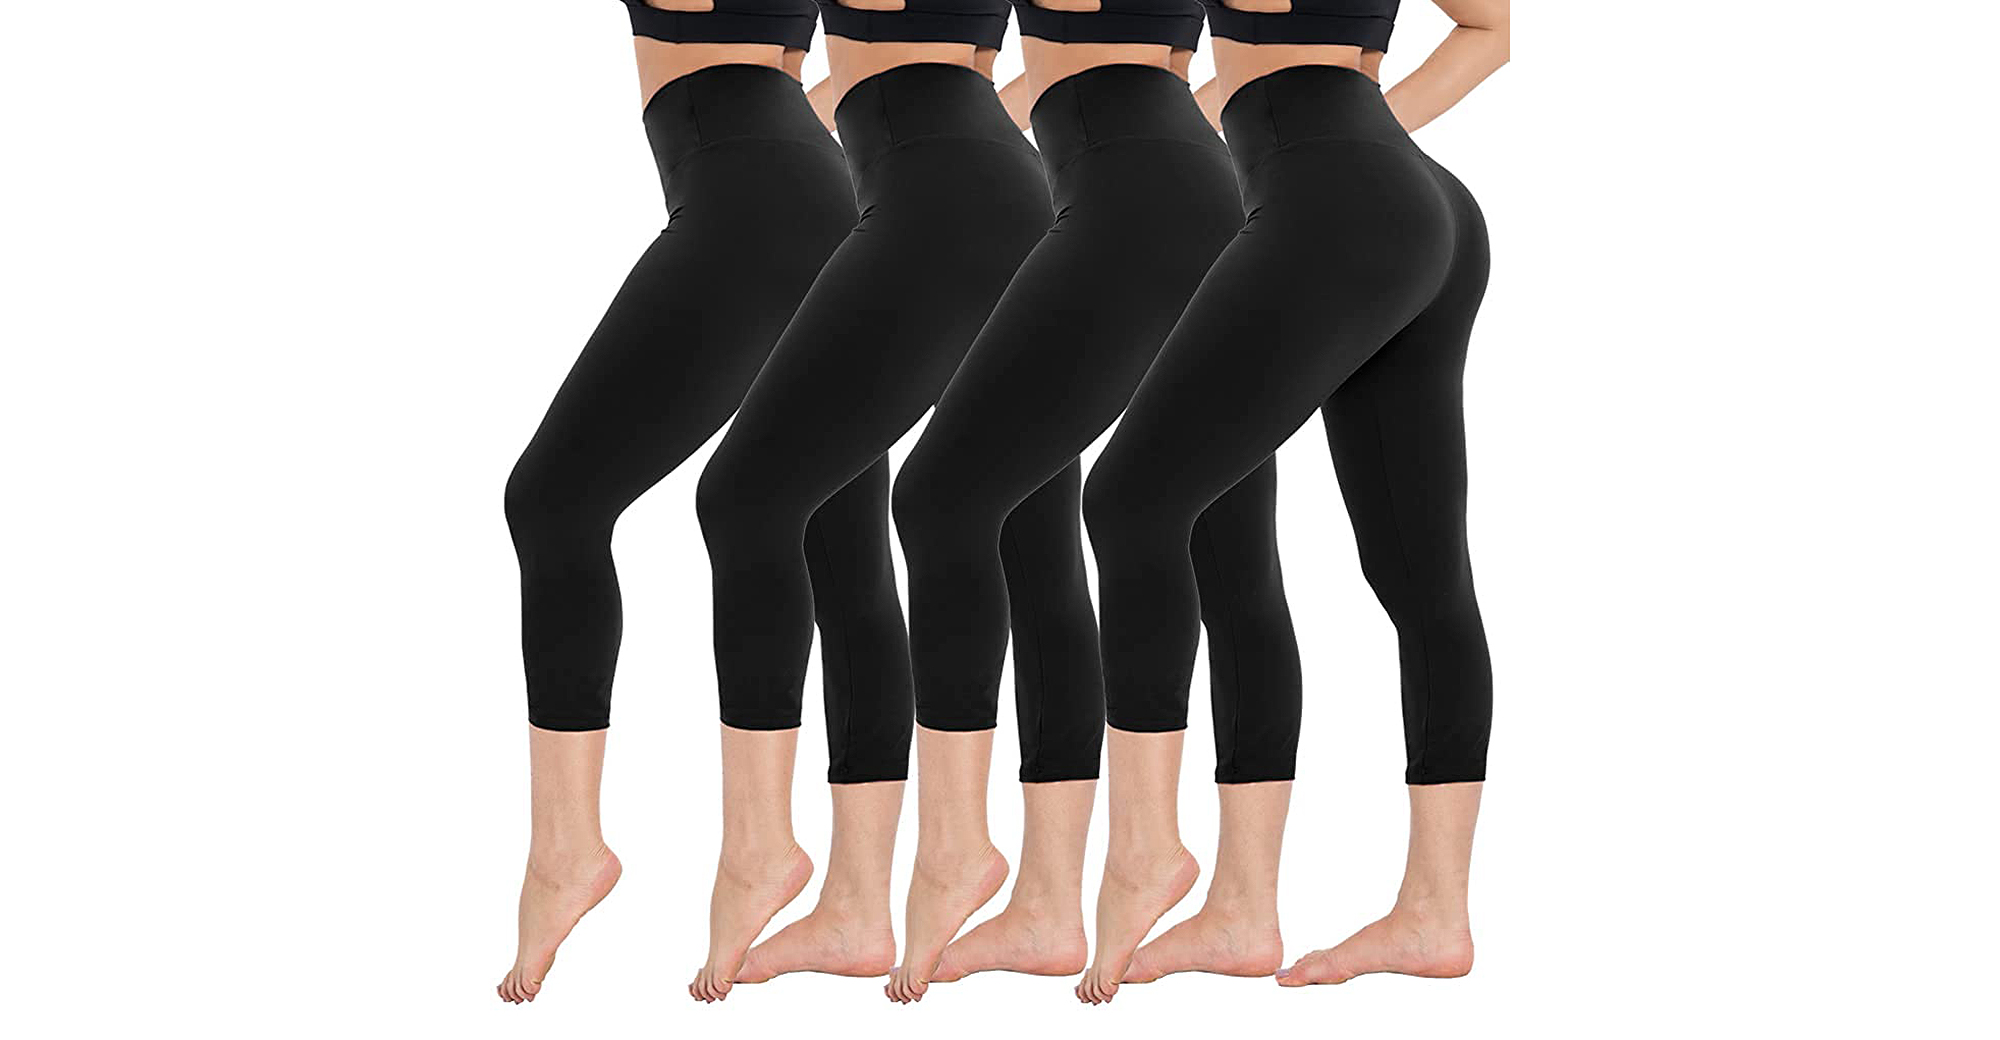 Campsnail Leggings 4-Pack Is Just $22 at